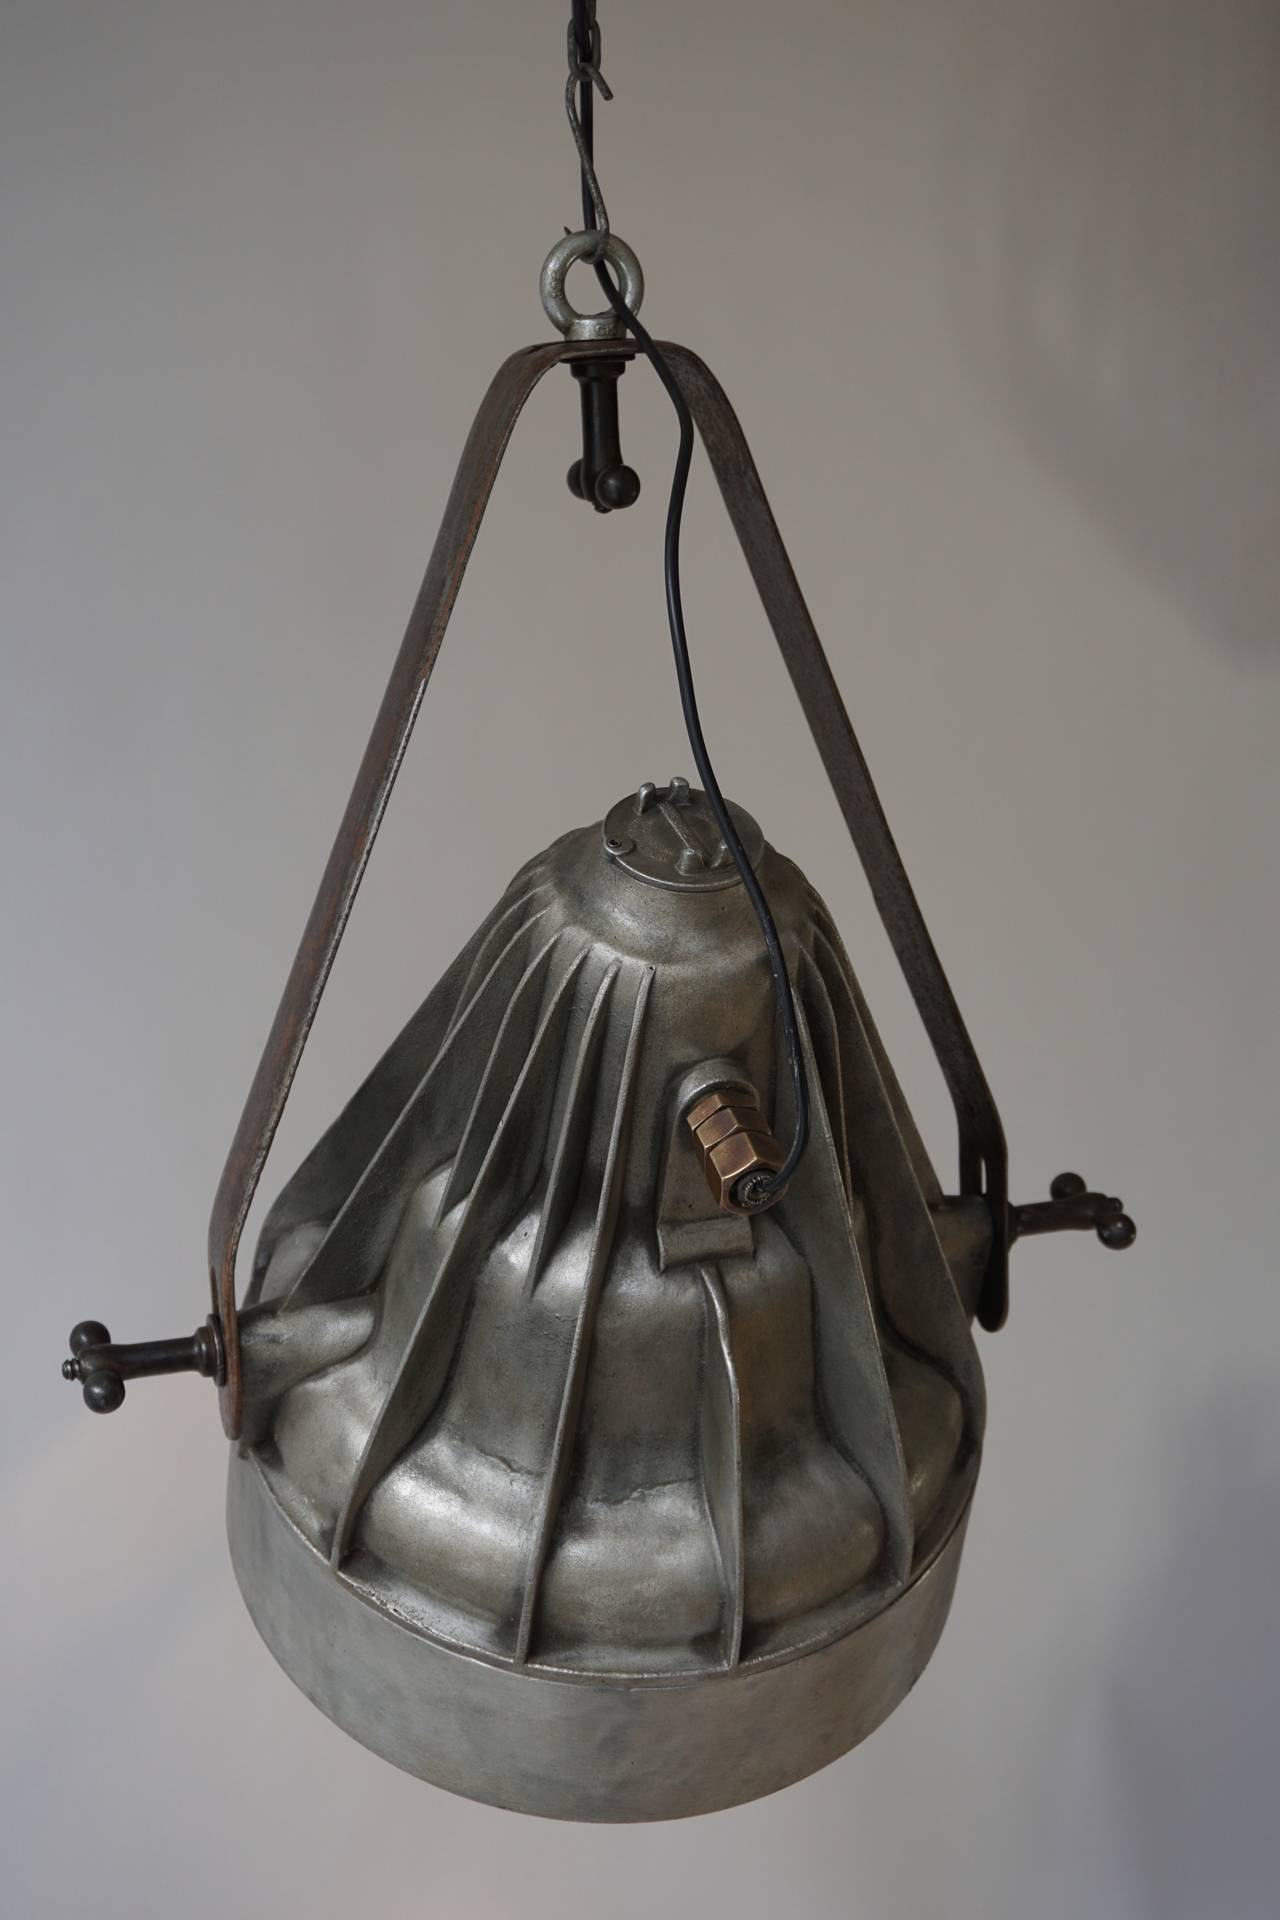 Large Industrial lamp used on a ship,
circa 1920s.
Measure: Weight 20 kg.